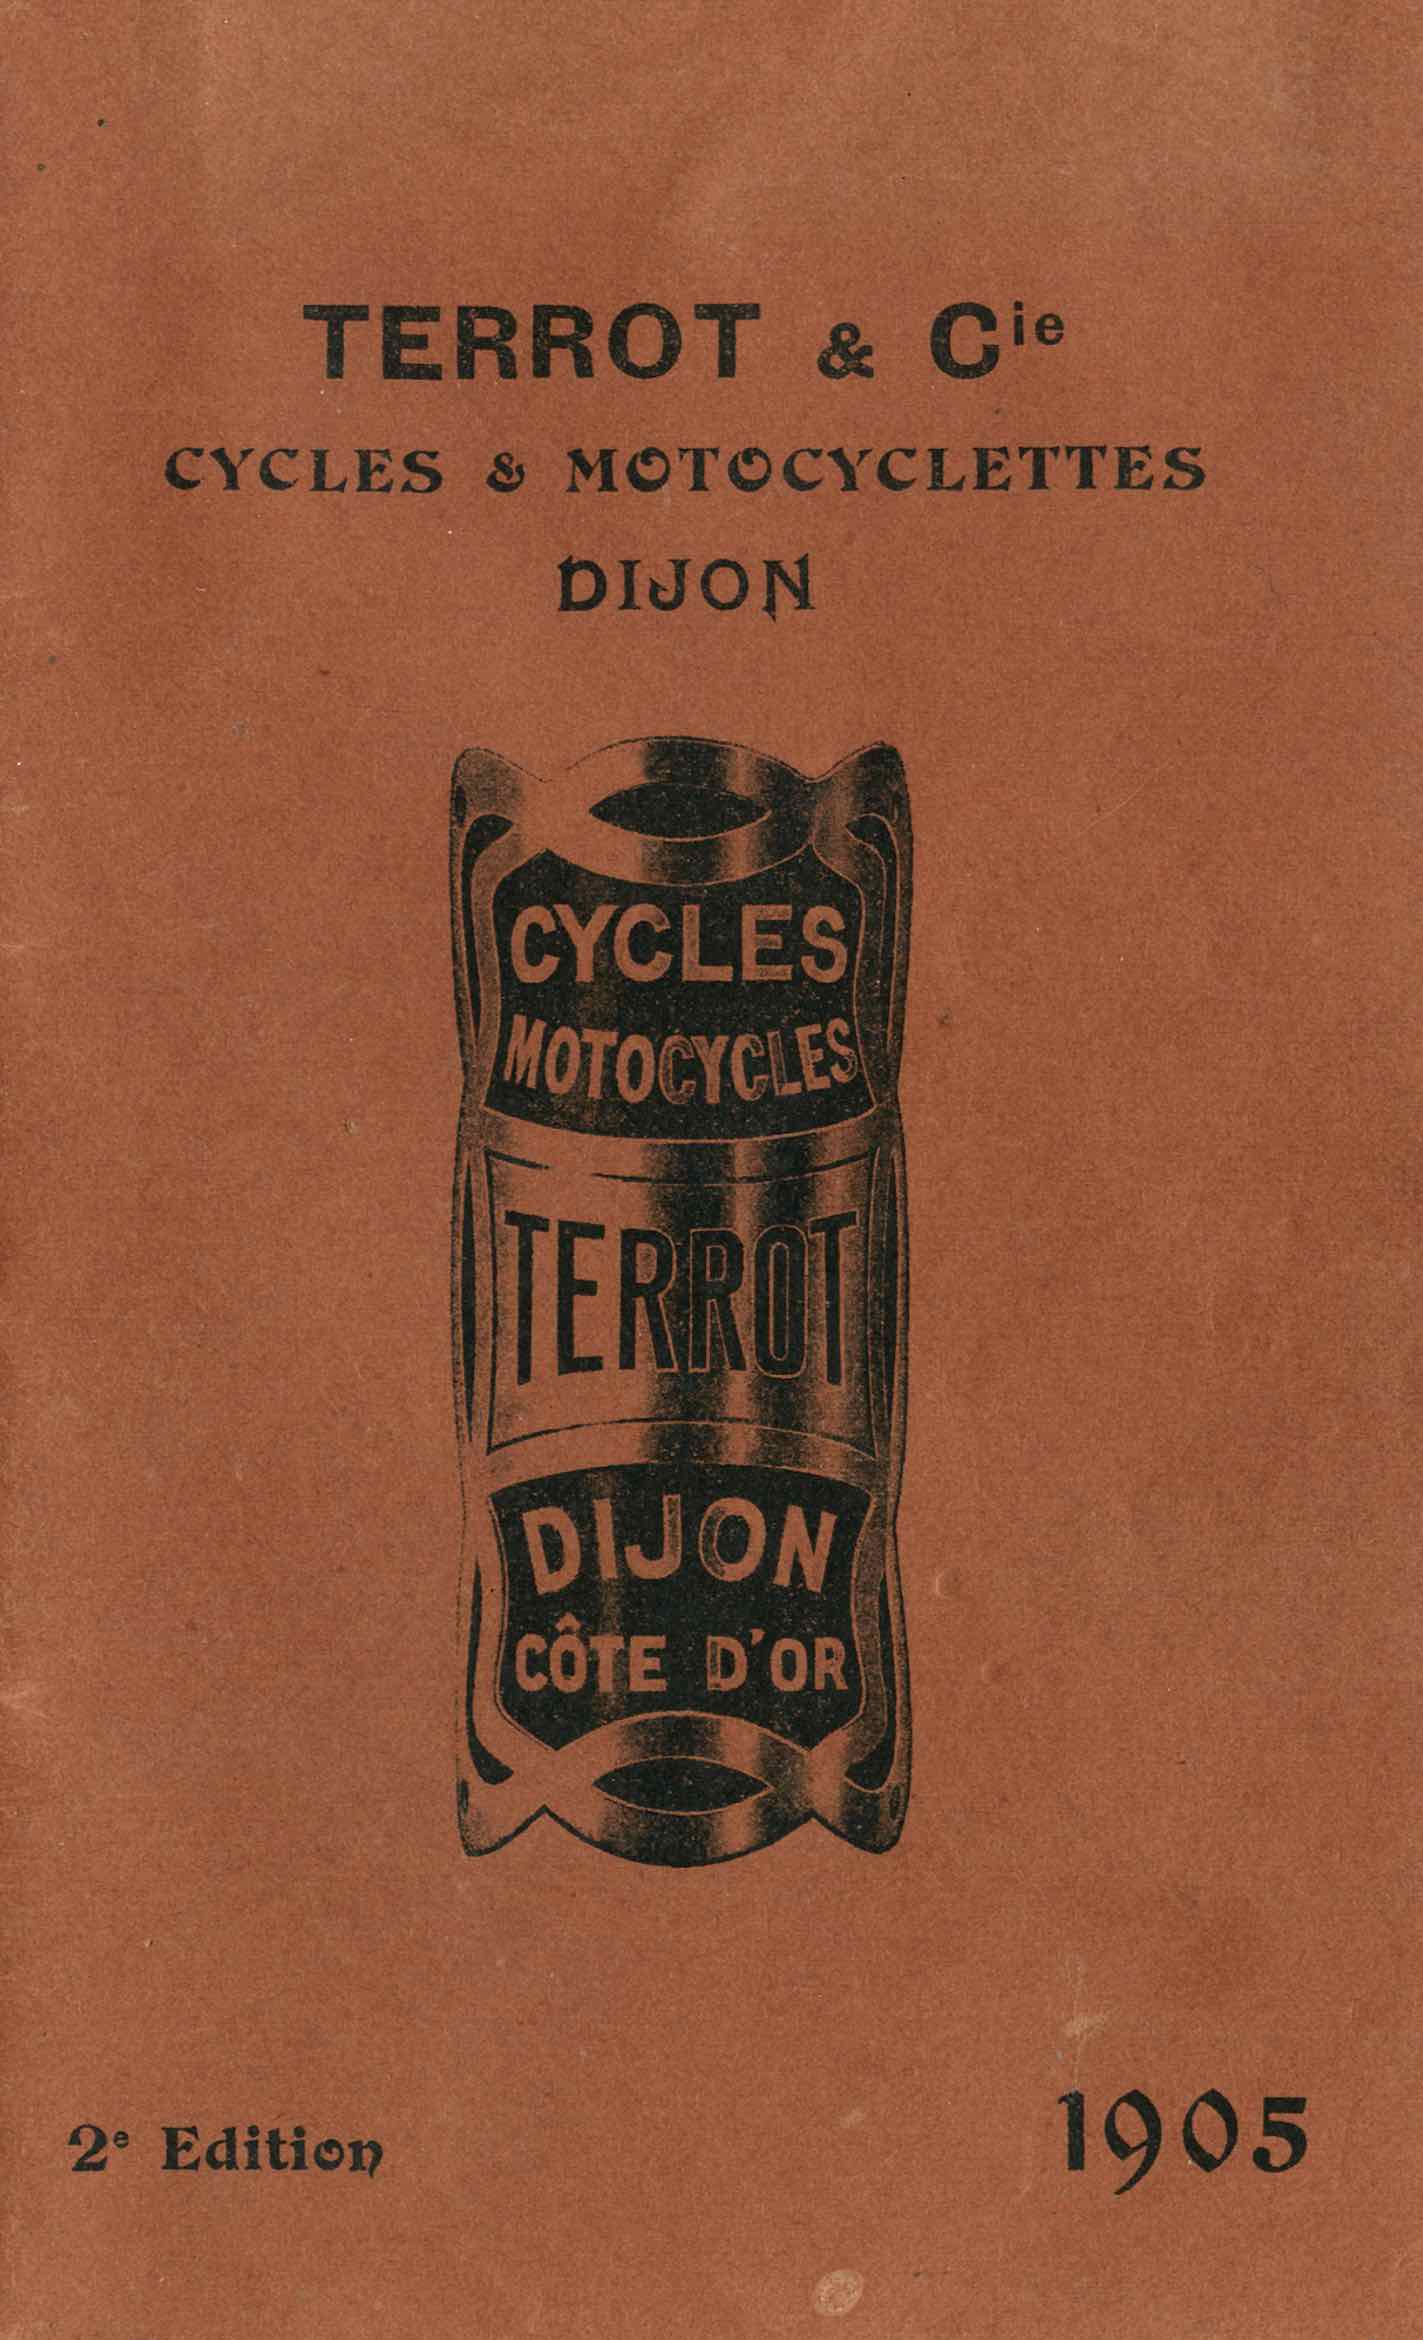 Terrot & Cie - Cycles & Motorcyclettes 1905 front cover main image